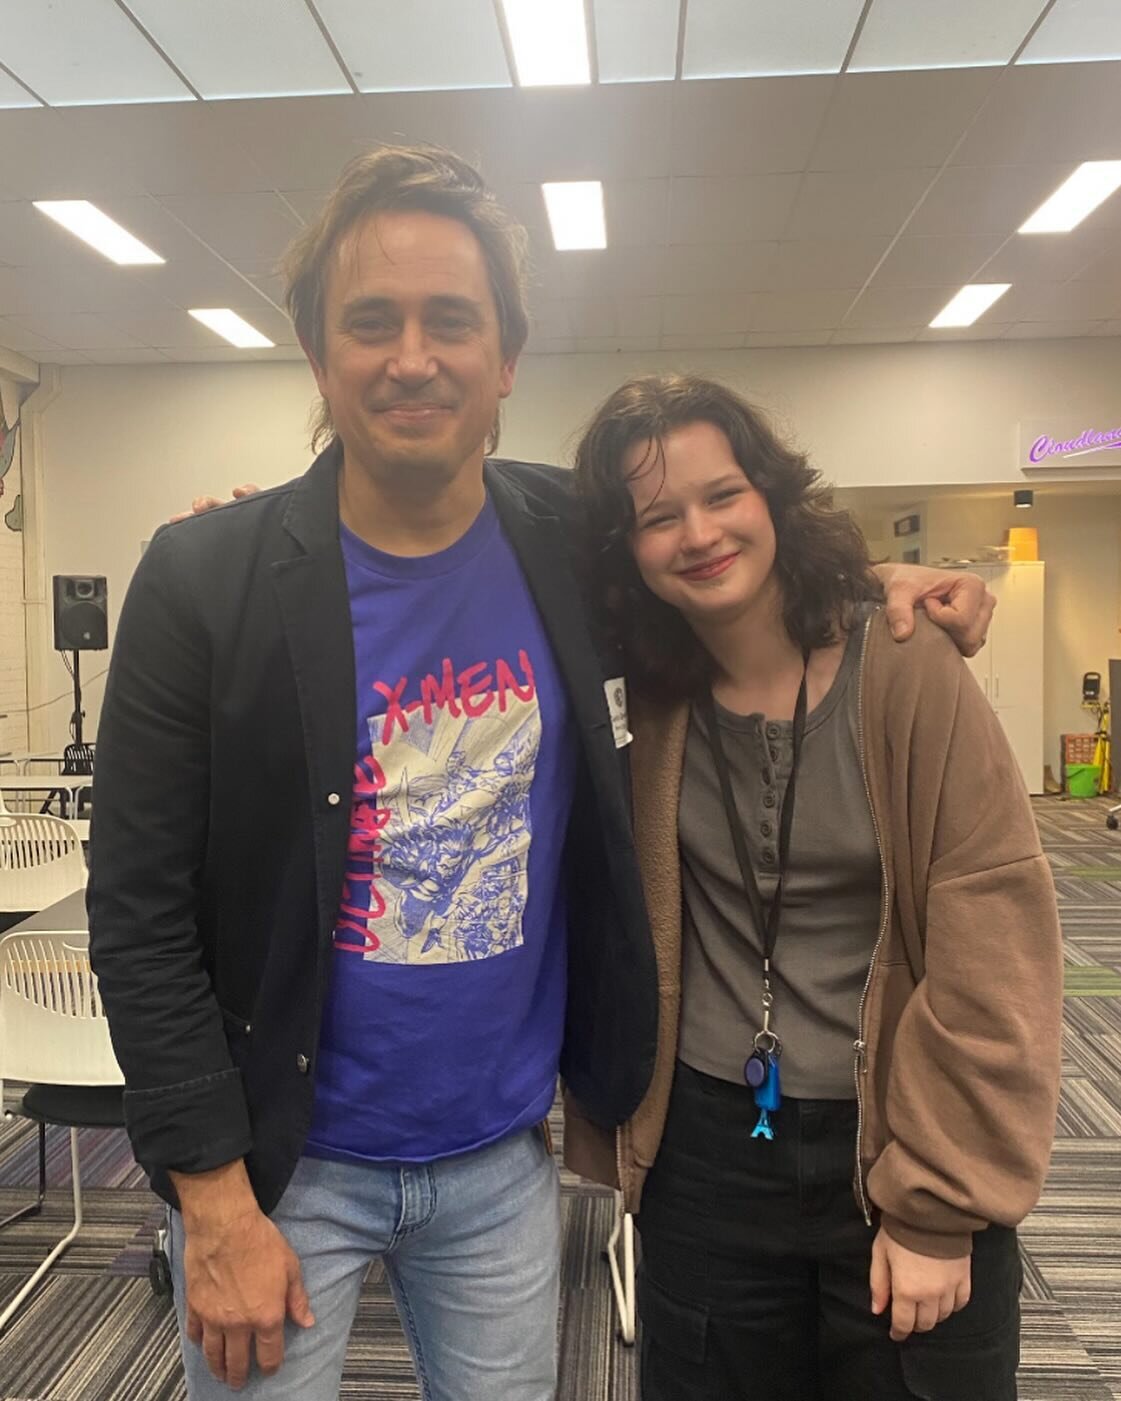 Cheeky throwback to when THE @trentdaltonauthor came to my school to talk about Boy Swallows Universe as we were studying the book in English class. In lead up to the premiere in a few days I thought this post was appropriate. Thanks Trent for everyt